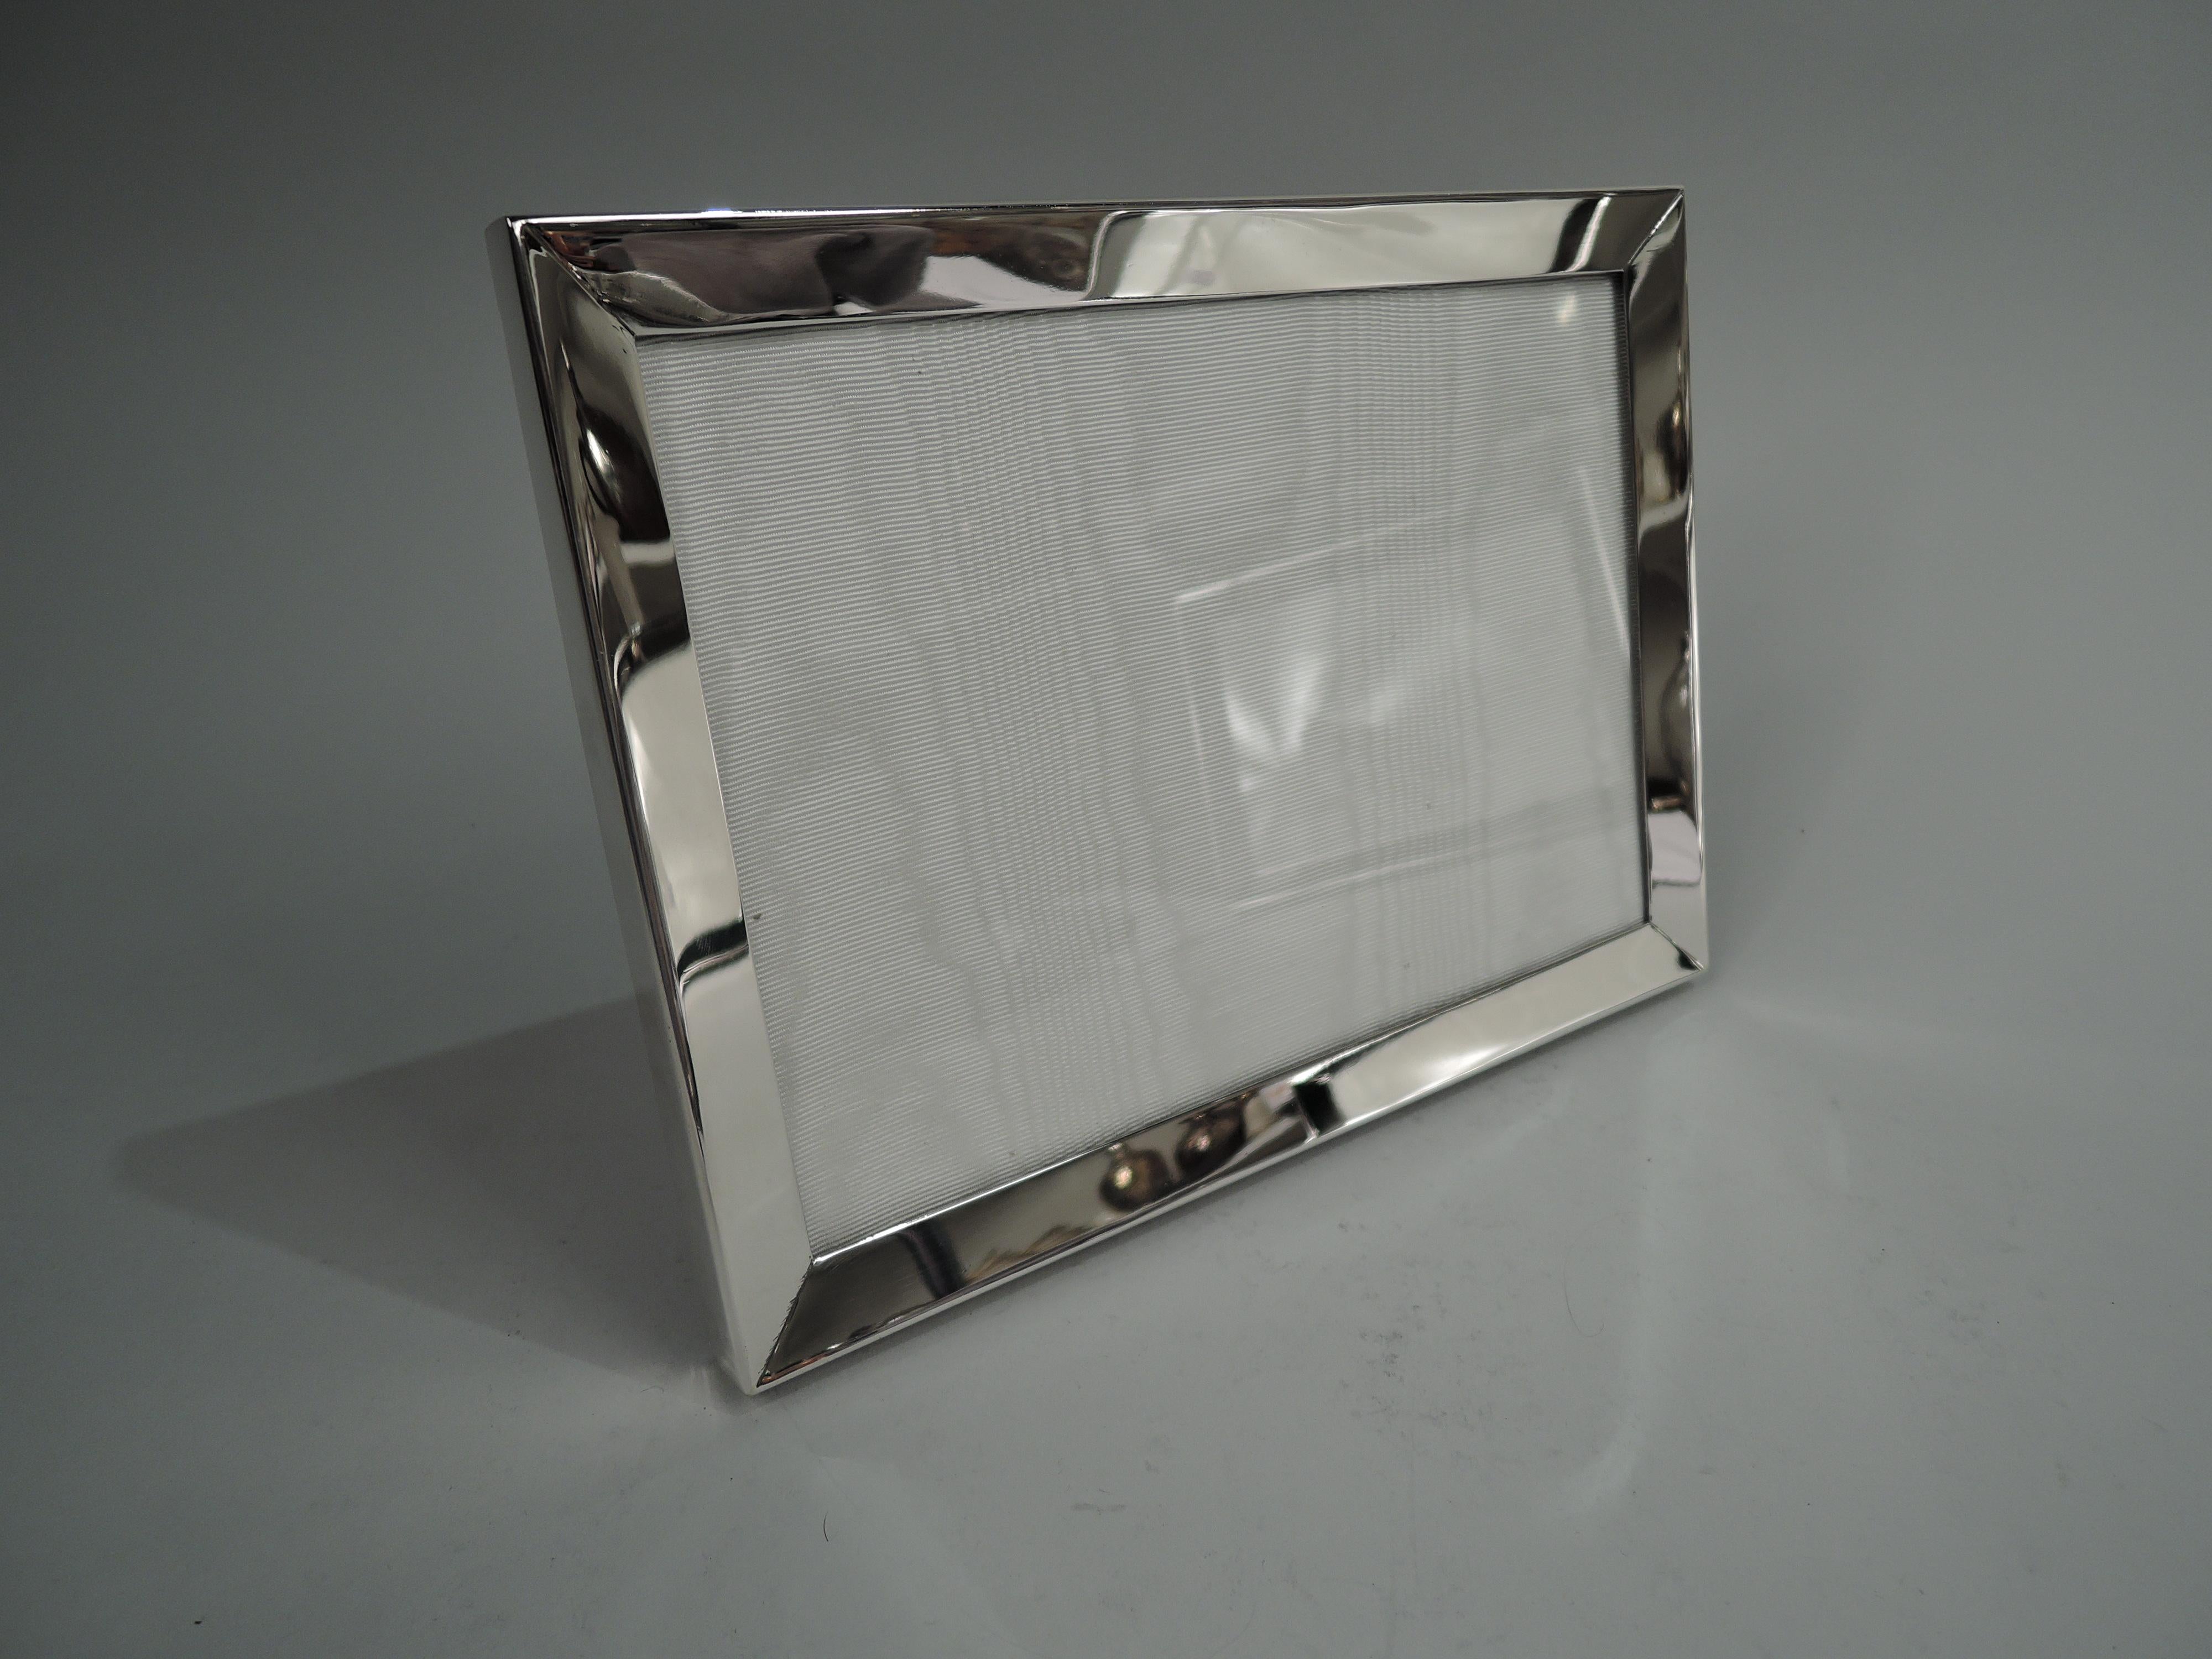 Modern sterling silver picture frame. Retailed by Cartier in New York. Rectangular window in same surround with tapering front and flat sides. Midcentury chic in hard-to-find landscape form. With glass, silk lining, and laminate back and hinged